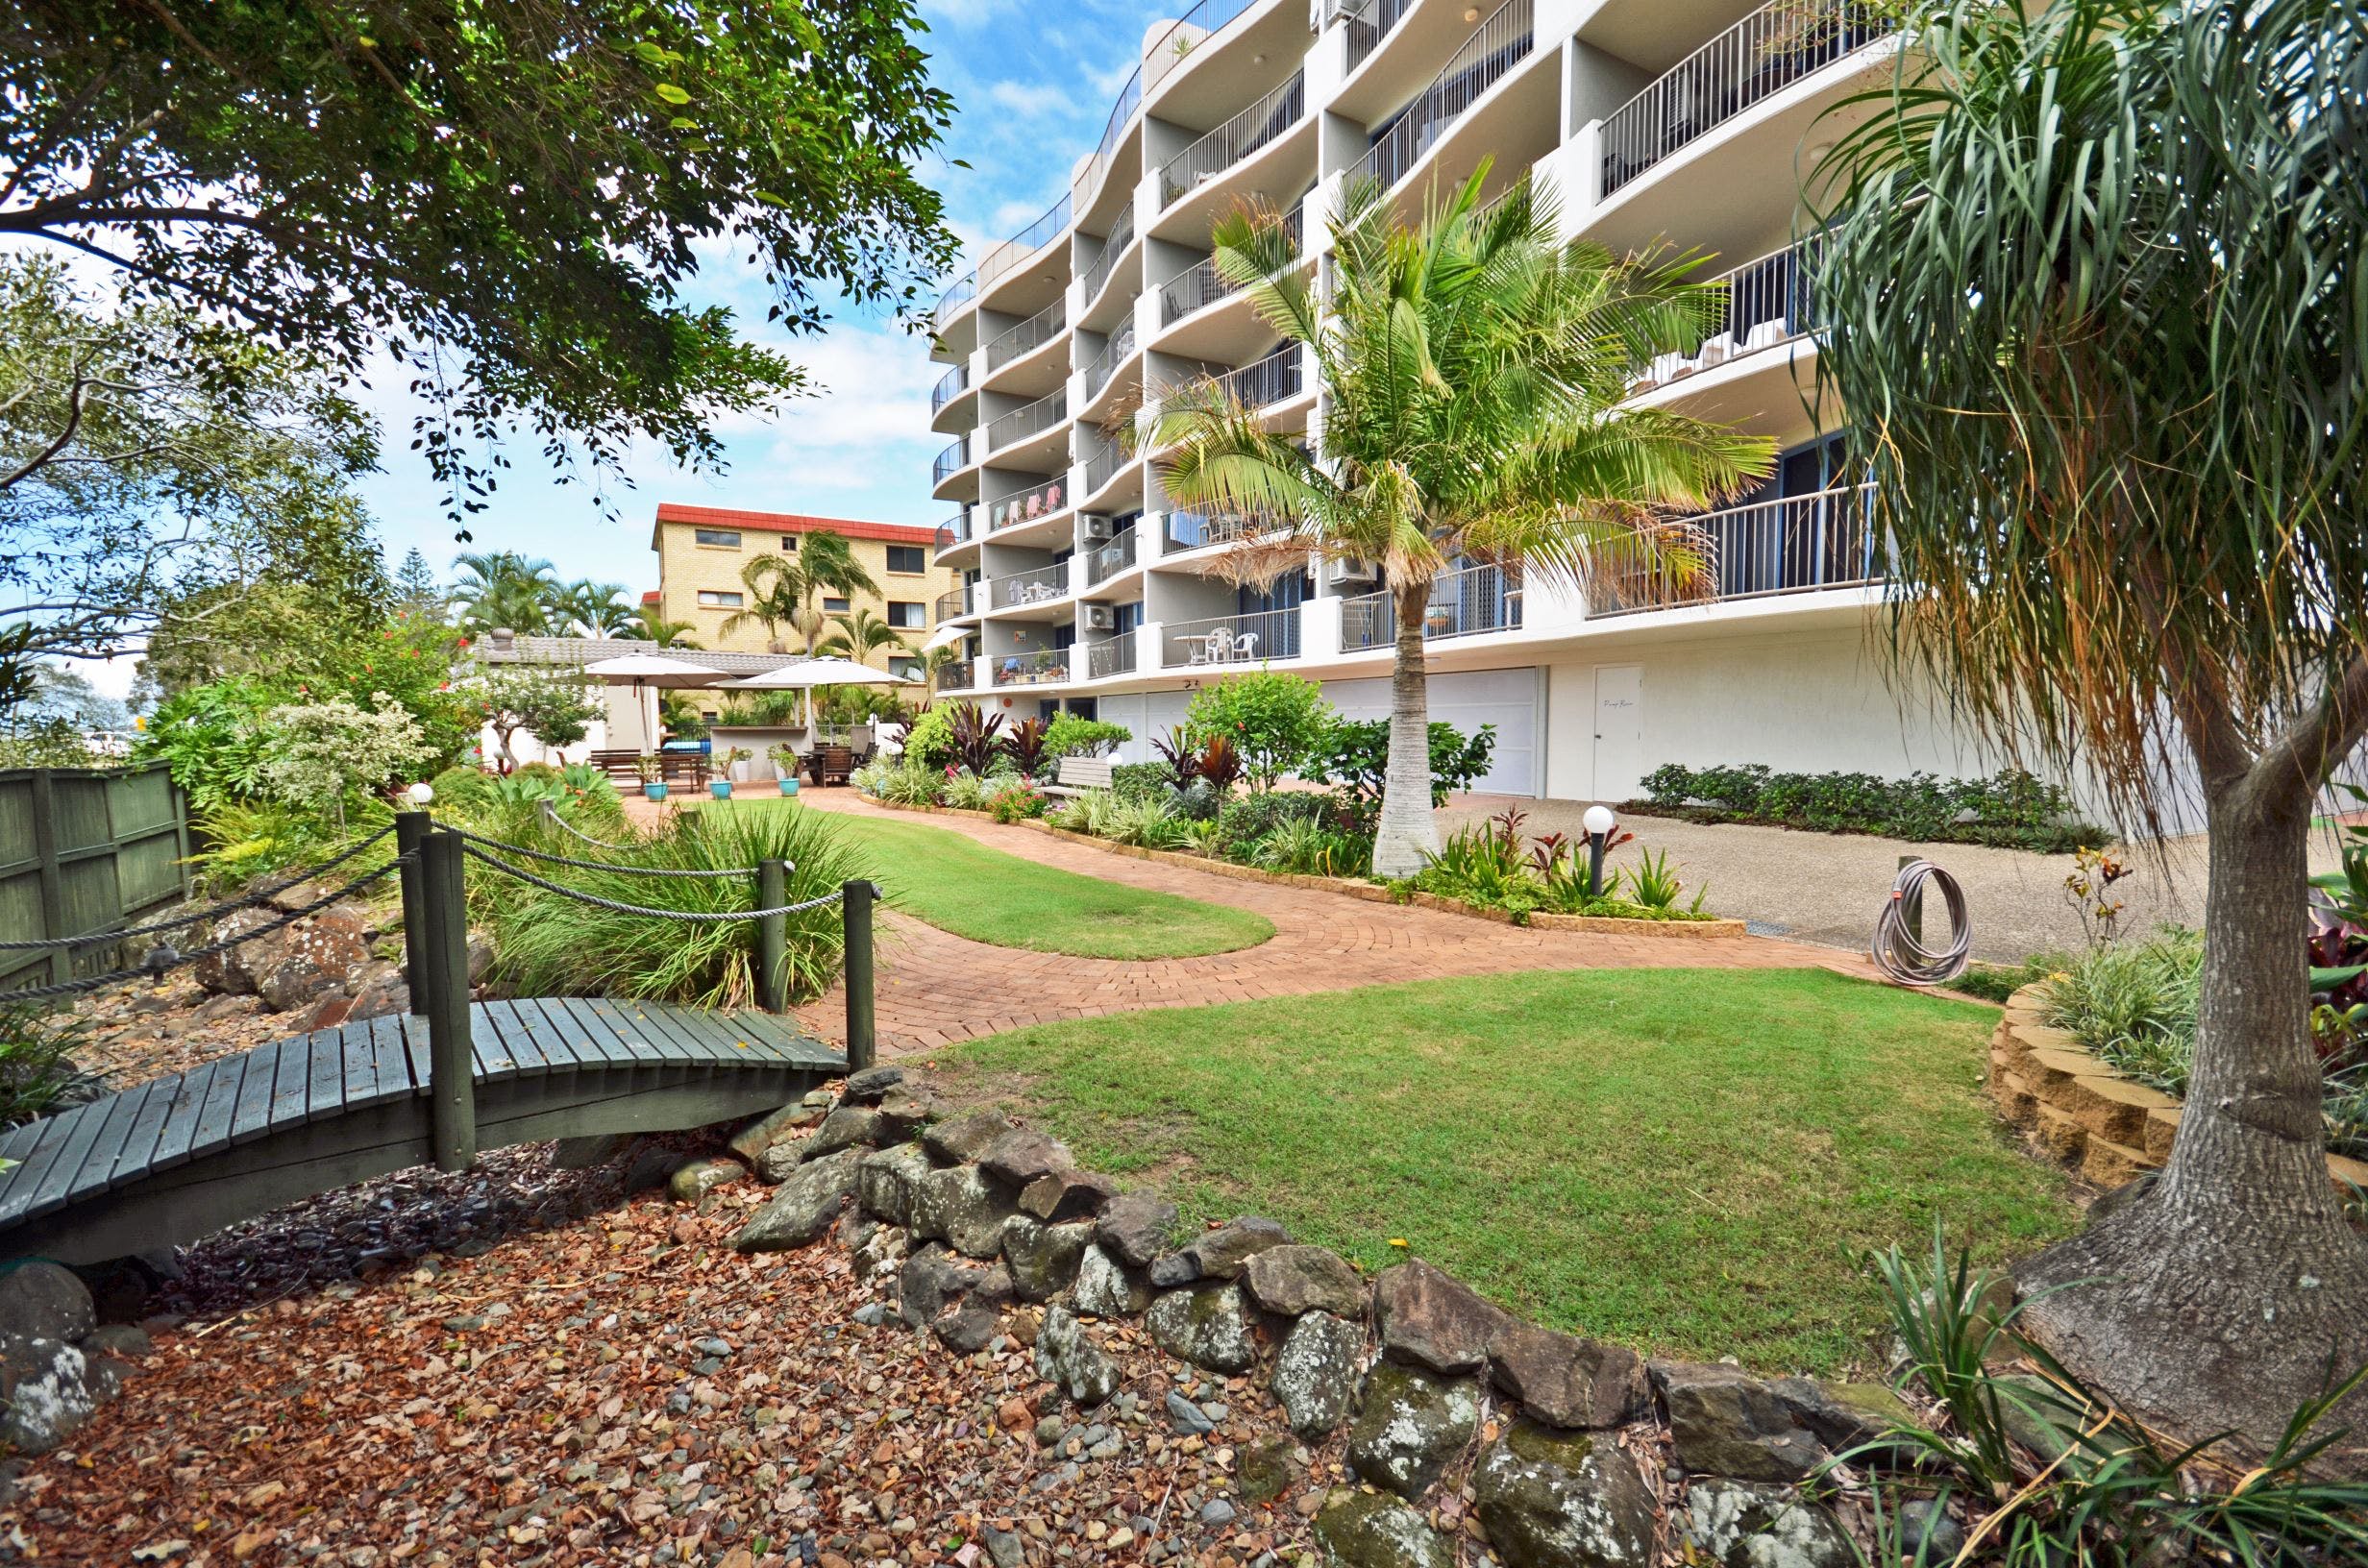 Sails Resort on Golden Beach - Accommodation in Surfers Paradise